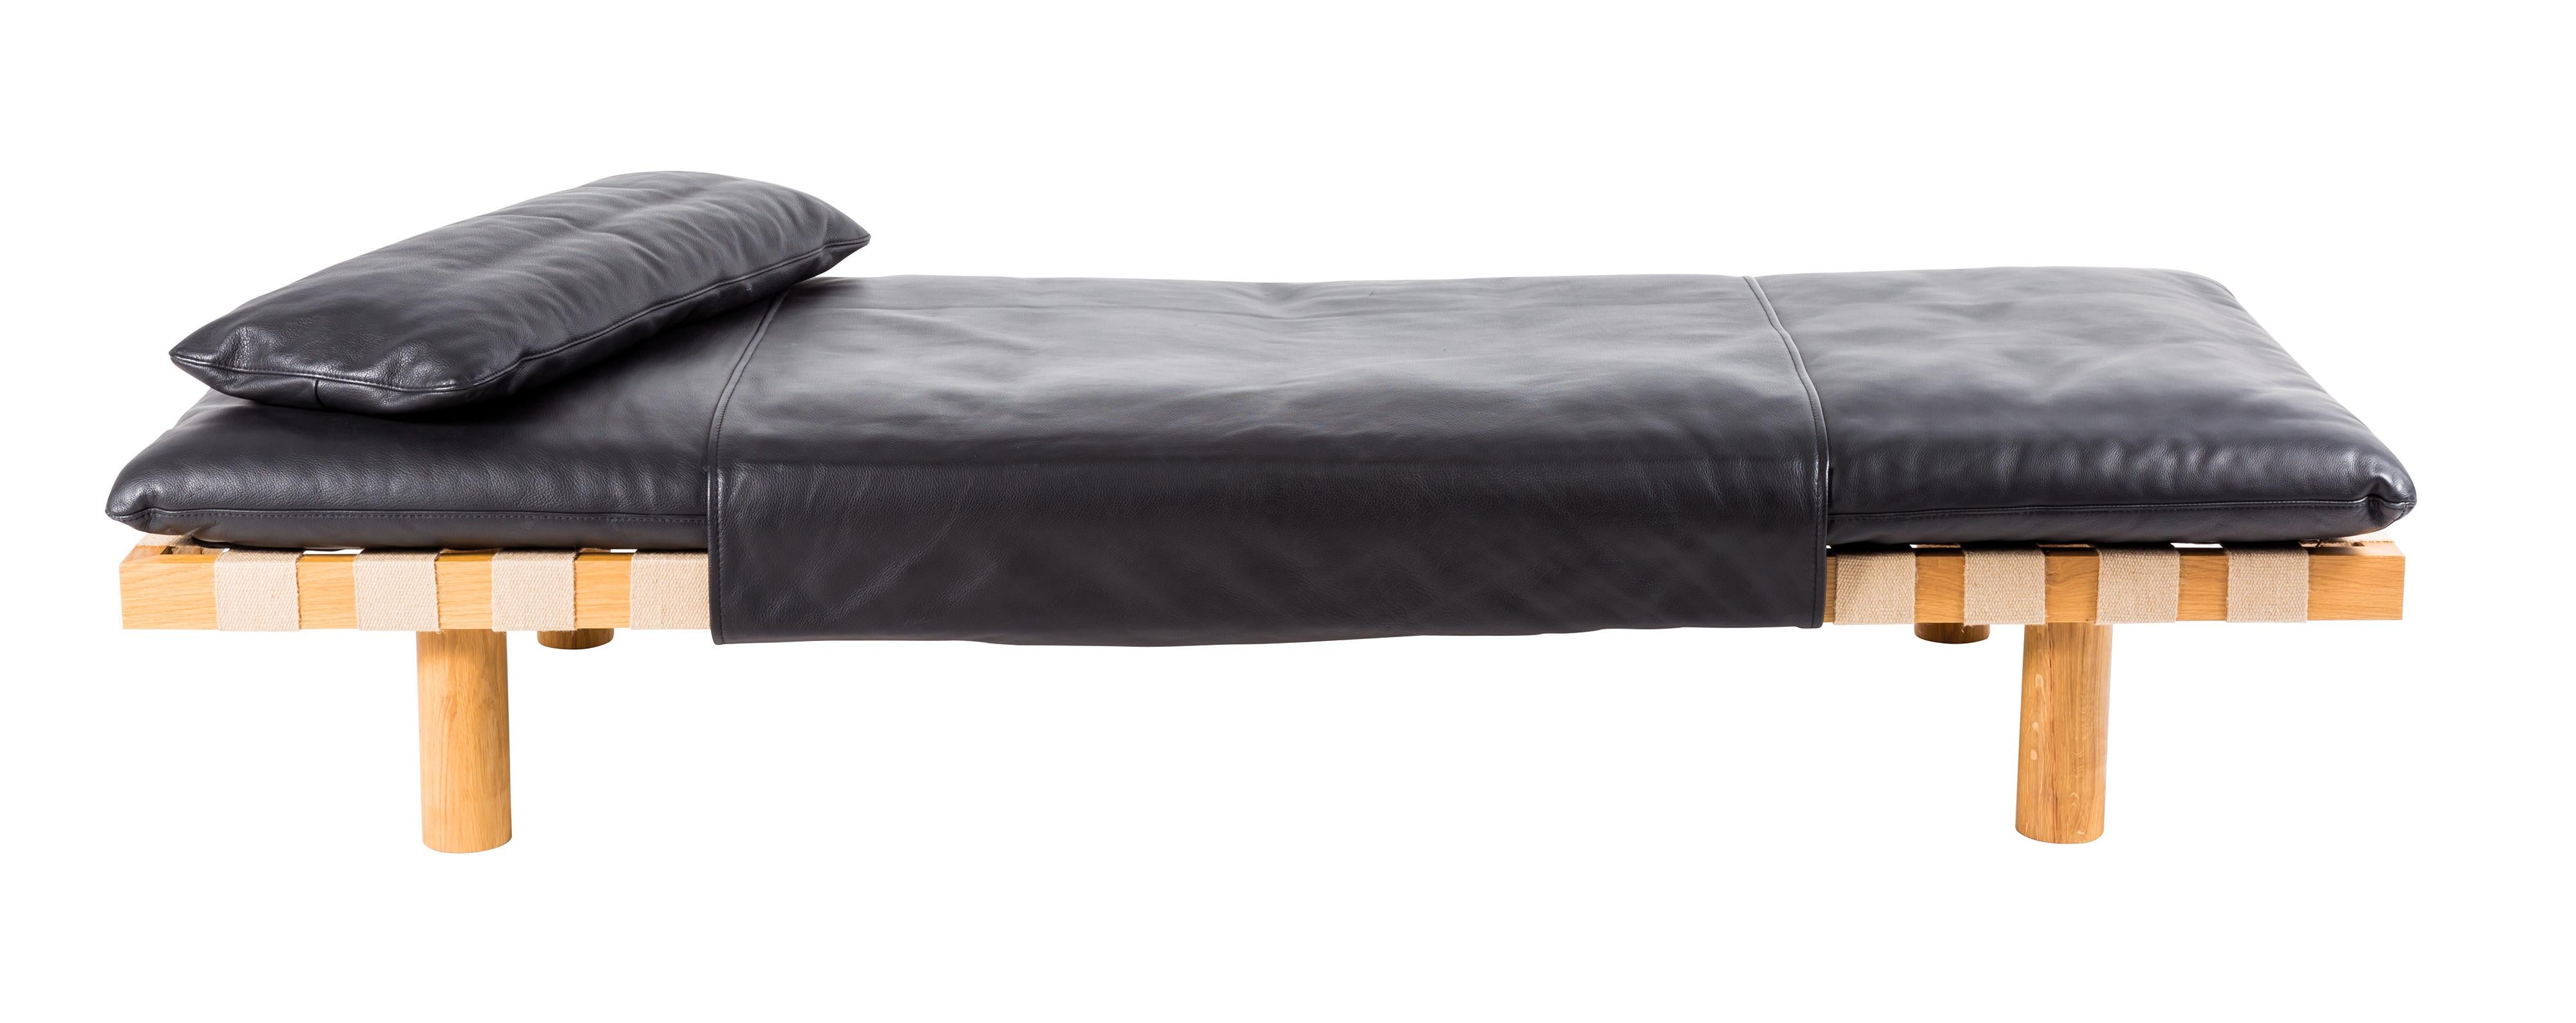 Pallet black leather nature day bed by Pulpo
Dimensions: D200 x W80 x H29 cm
Materials: fabric/leather, foam and wood

Also available in different colours and finishes.

Thinking about the first significant furniture for pulpo with the typical